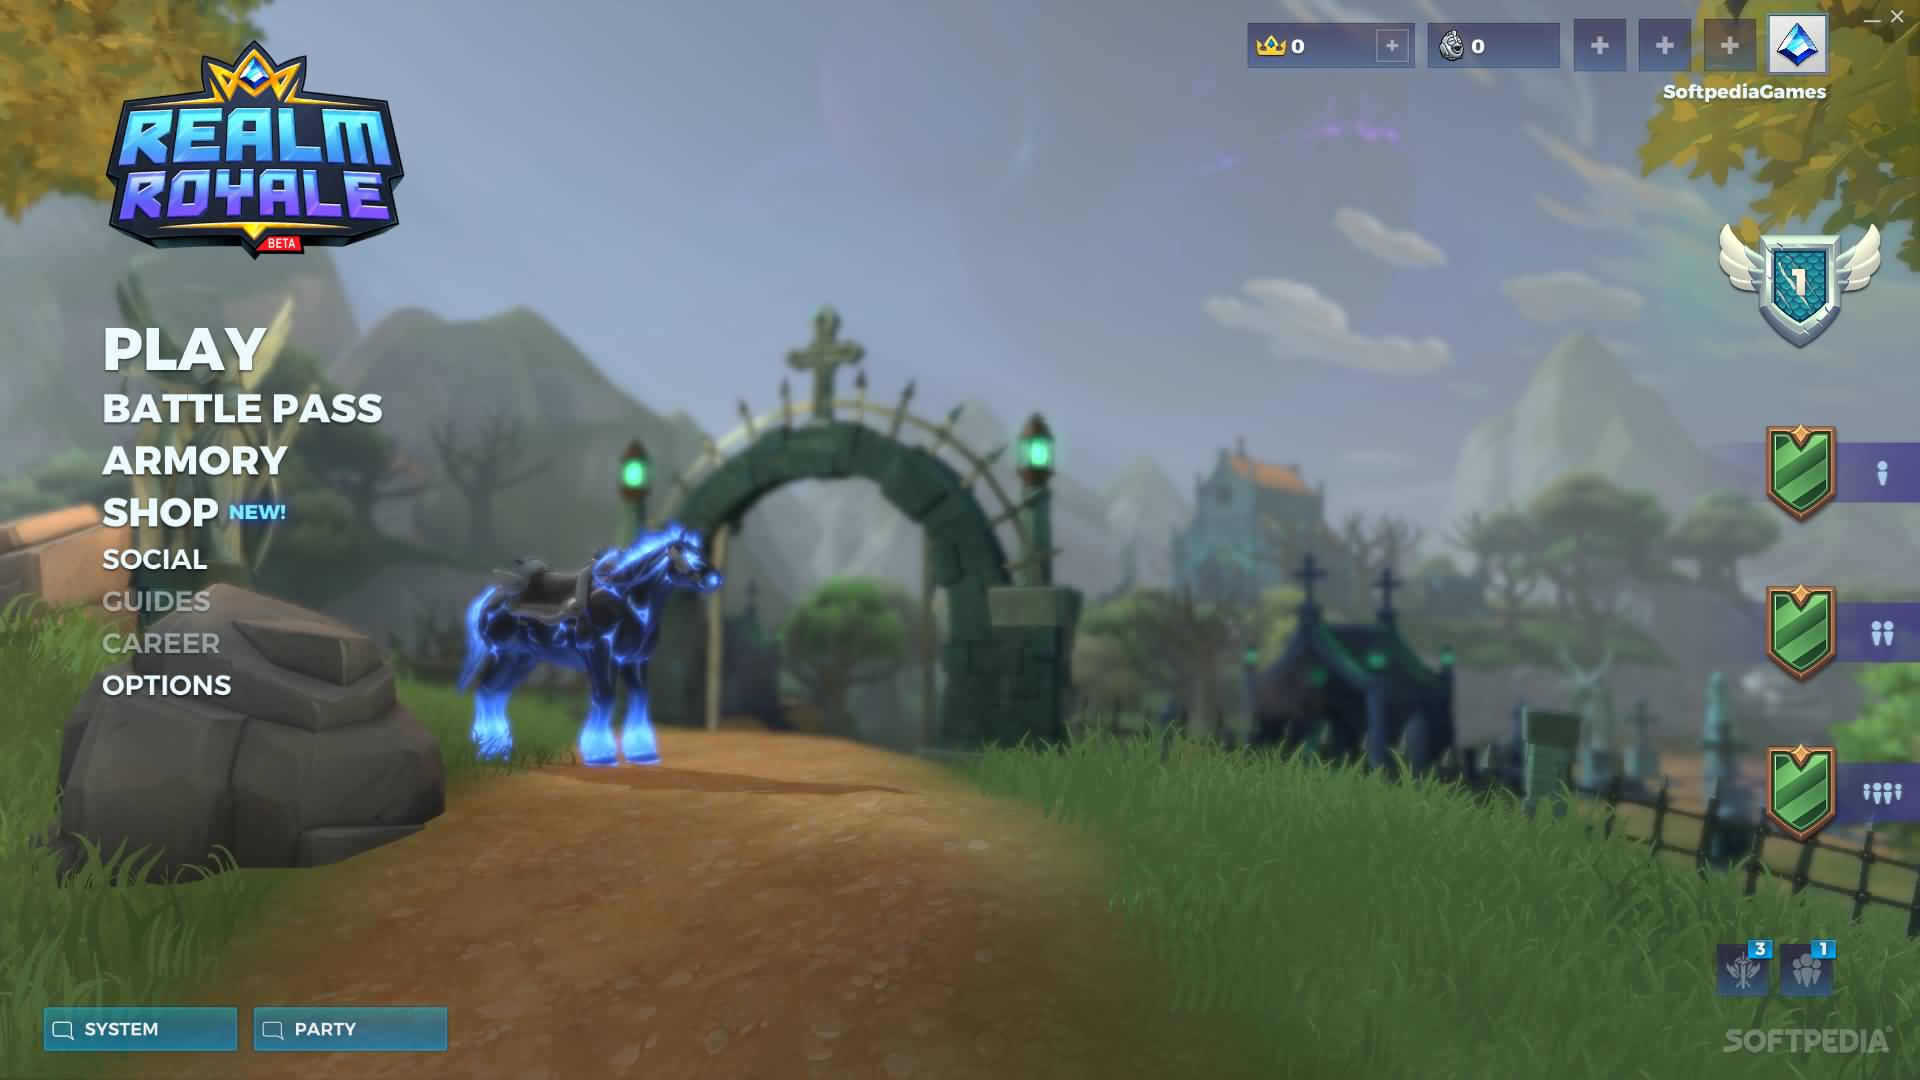 Realm royale sign in